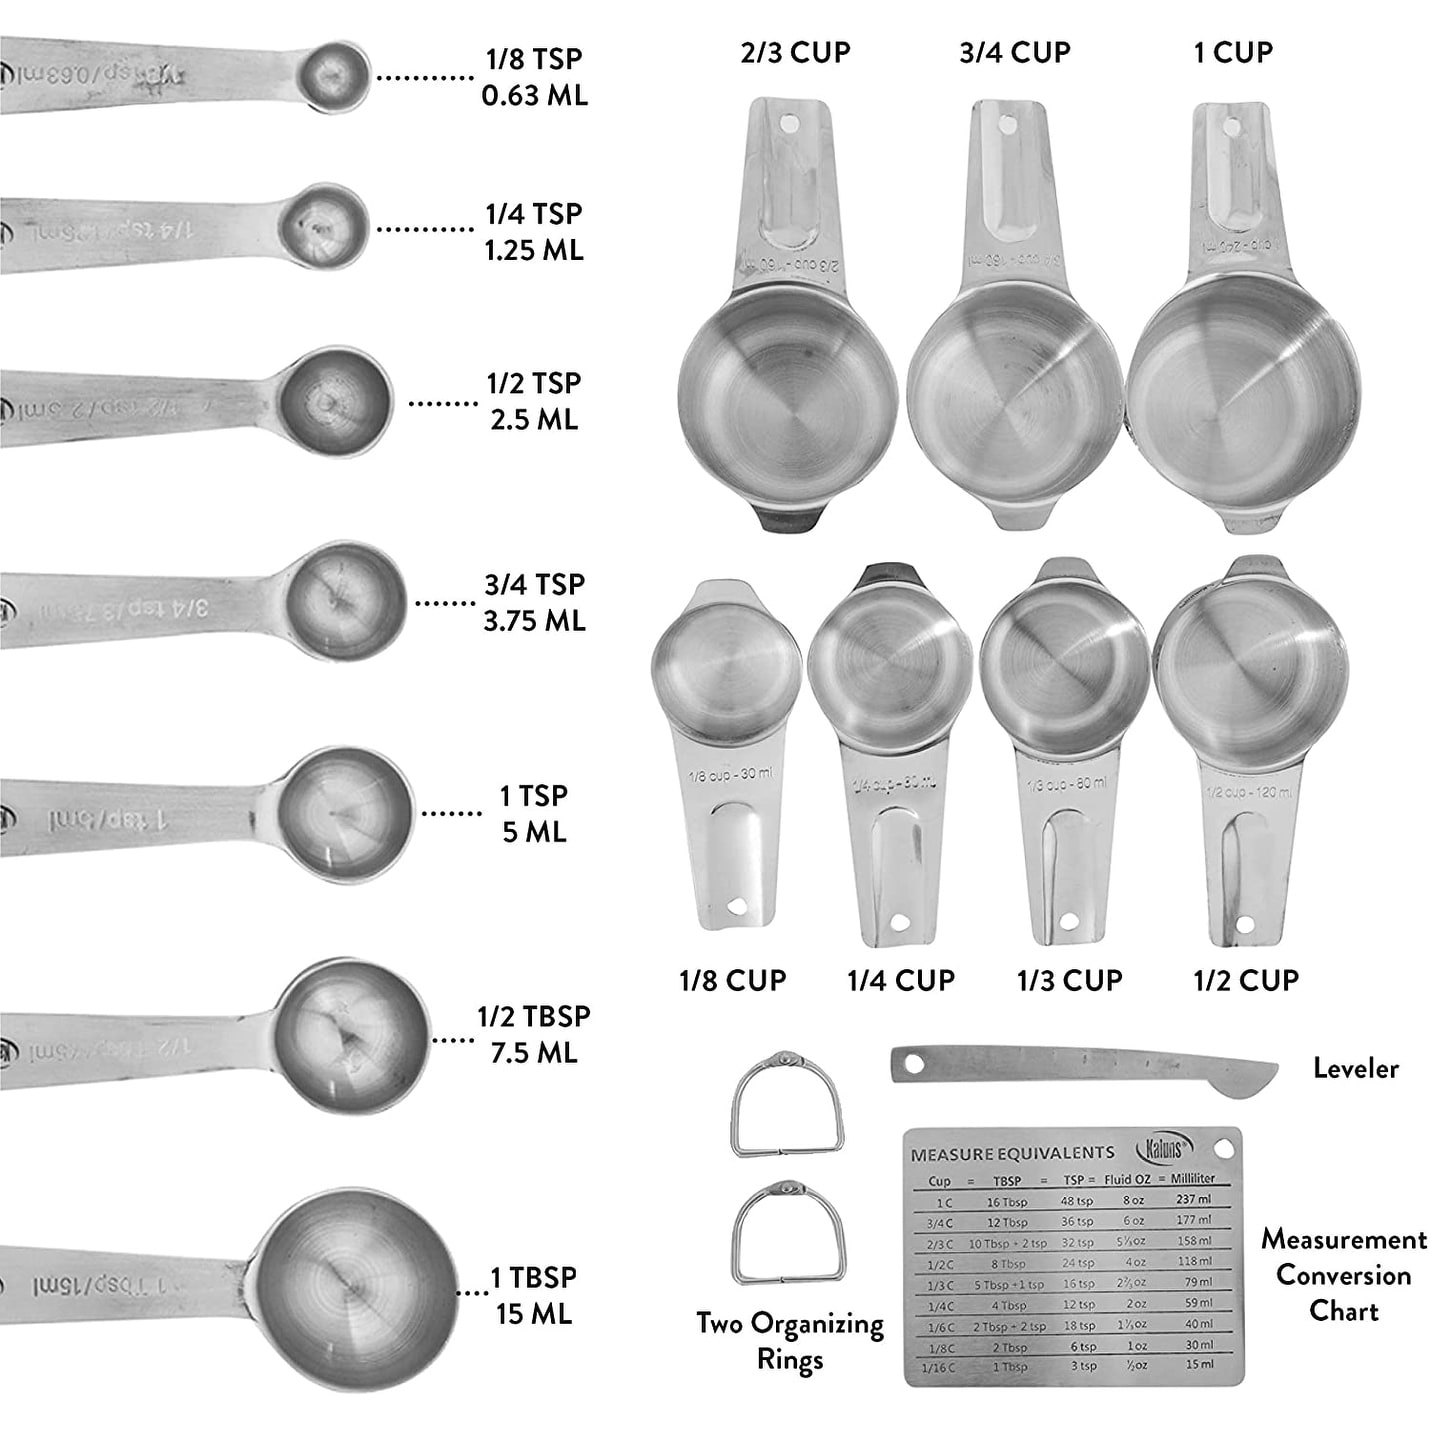 https://ak1.ostkcdn.com/images/products/is/images/direct/8202ba3332348cb8506927c9c2719050c79f69fa/Kaluns-Measuring-Cups%2C-Measuring-Spoons%2C-16-Piece-Stainless-Steel-Measuring-Set-Includes-Leveler-and-Measurements-Card.jpg